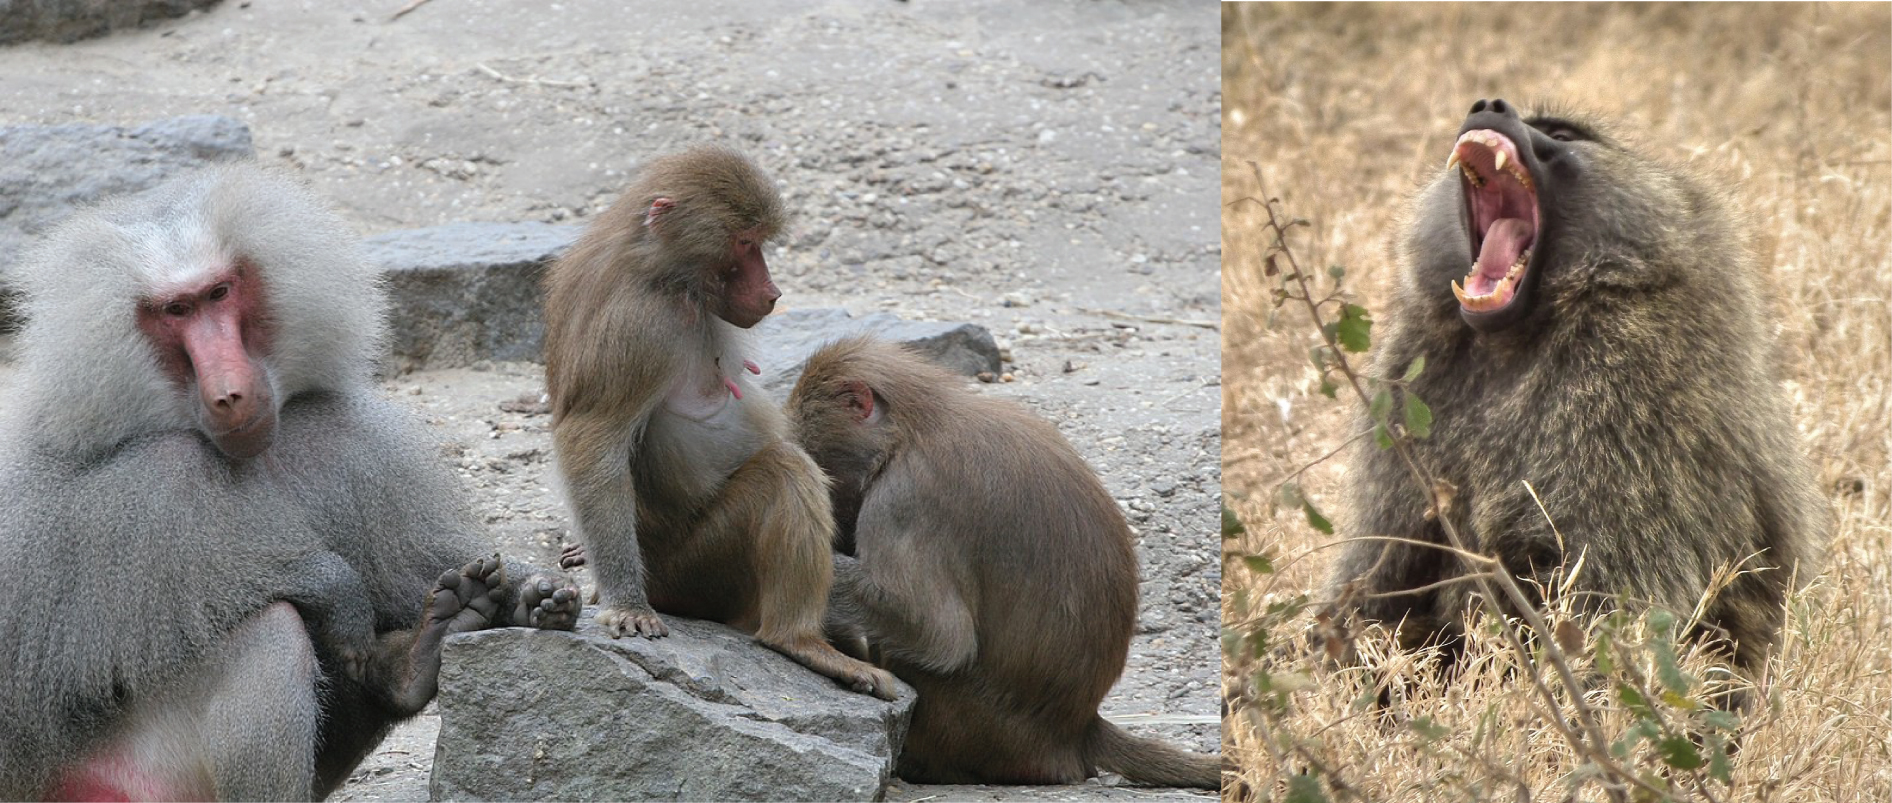 Male baboon with two females. Adult male baboon.